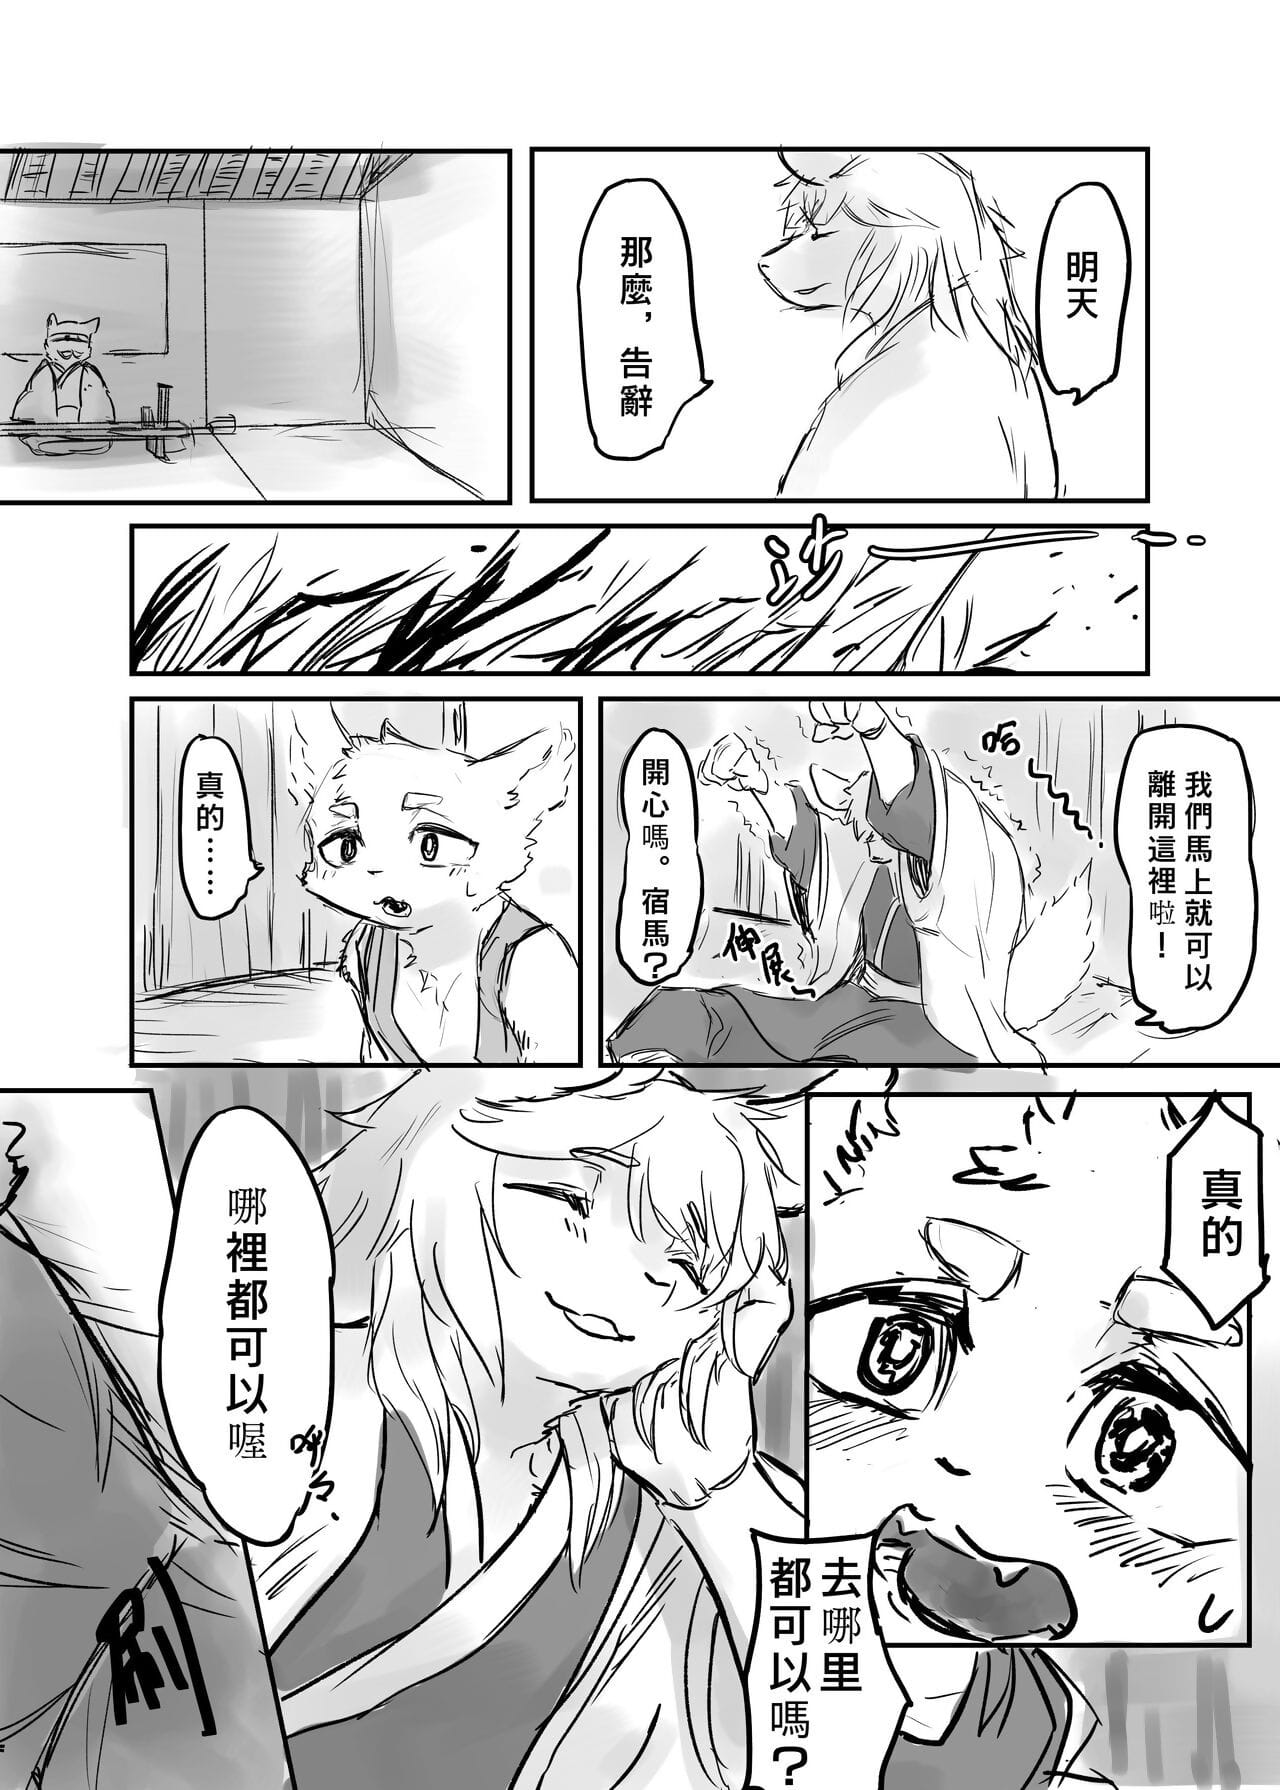 （the زائر 他乡之人 by：鬼流 جزء 2 page 1